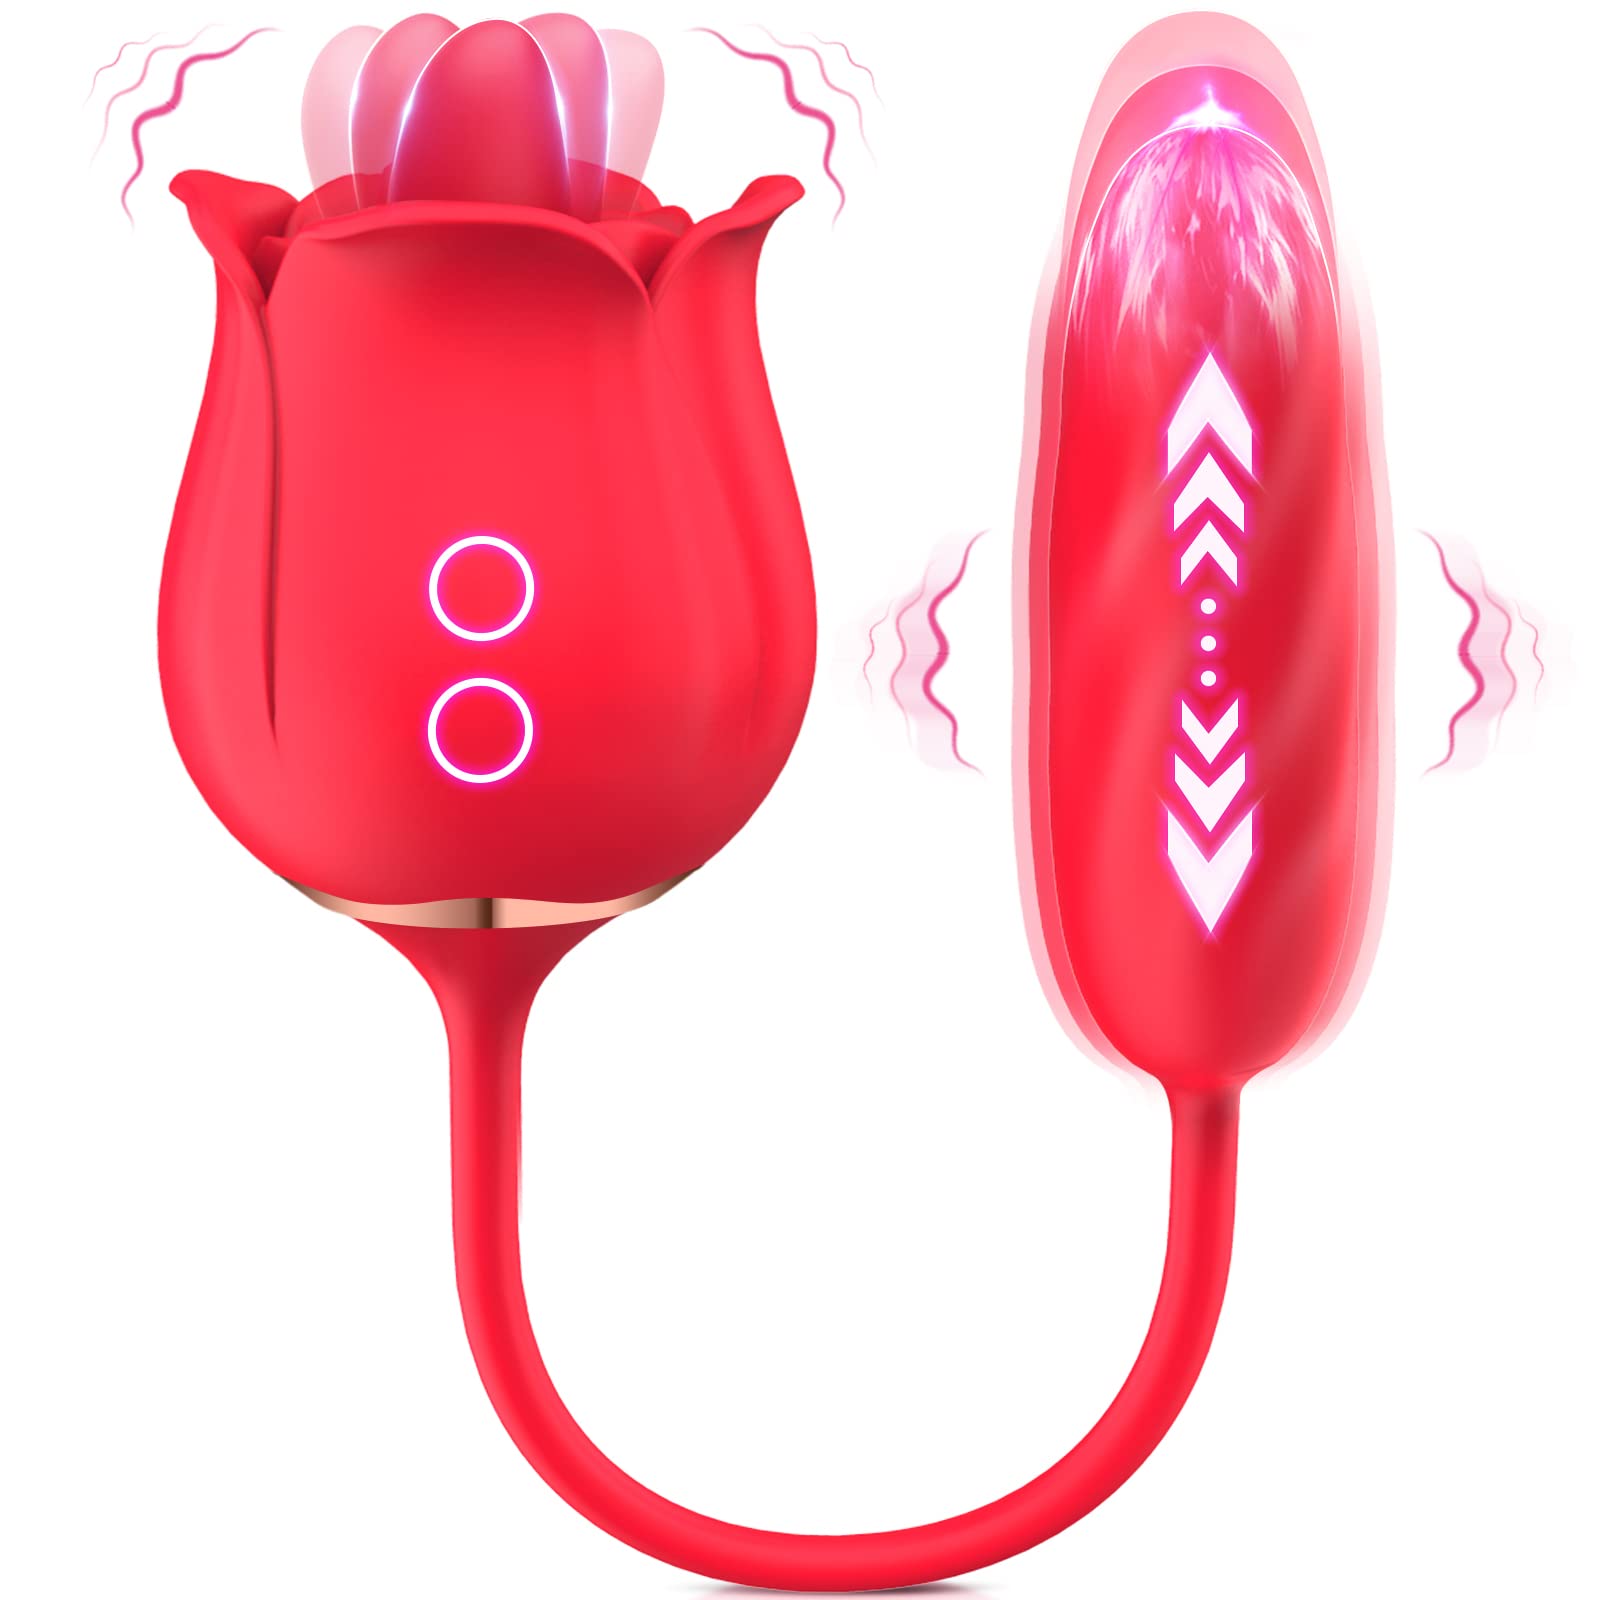 China Gold Supplier for Big Dildo Penis -  Rose Toy Vibrator for Women Tongue Licking Vibrator with Vibrating Egg  – Dreamsex